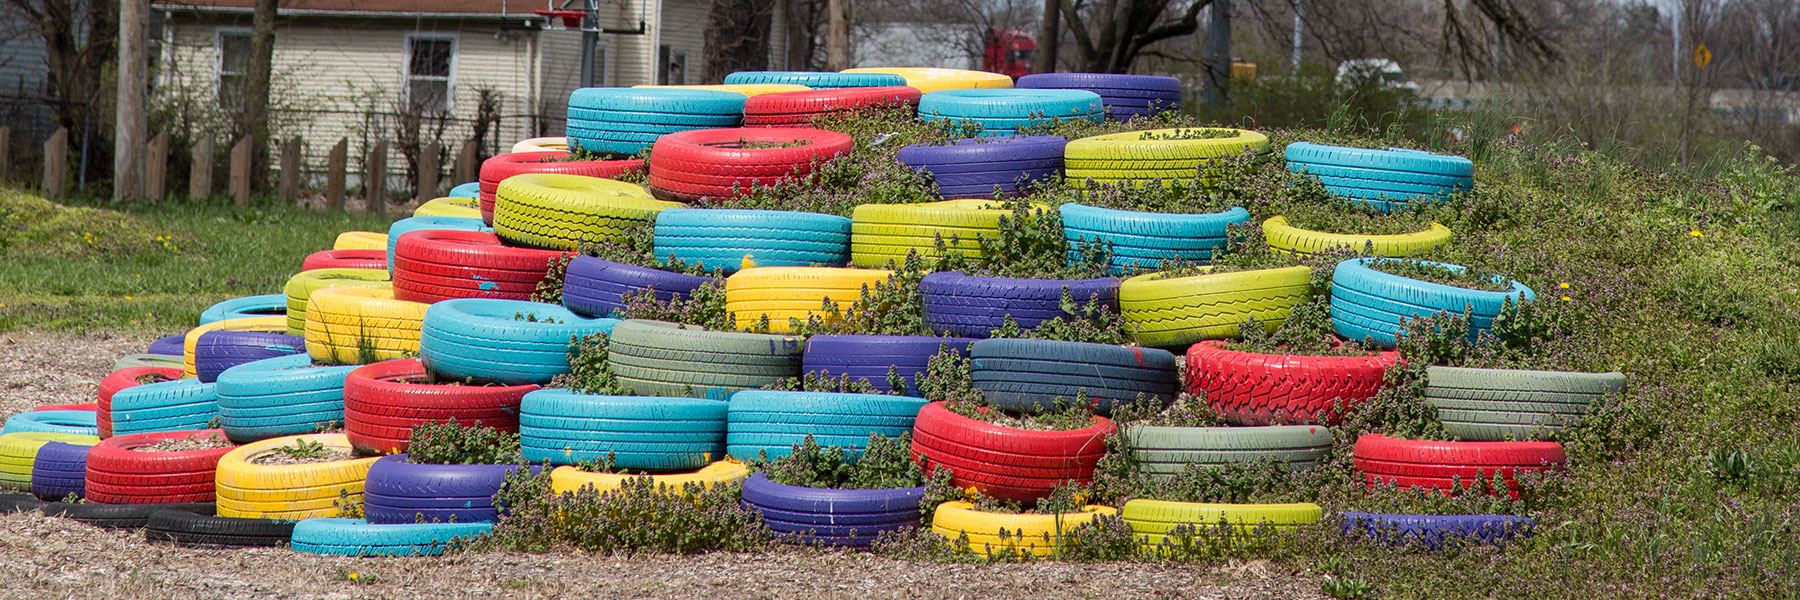 colorful tires stacked on hill